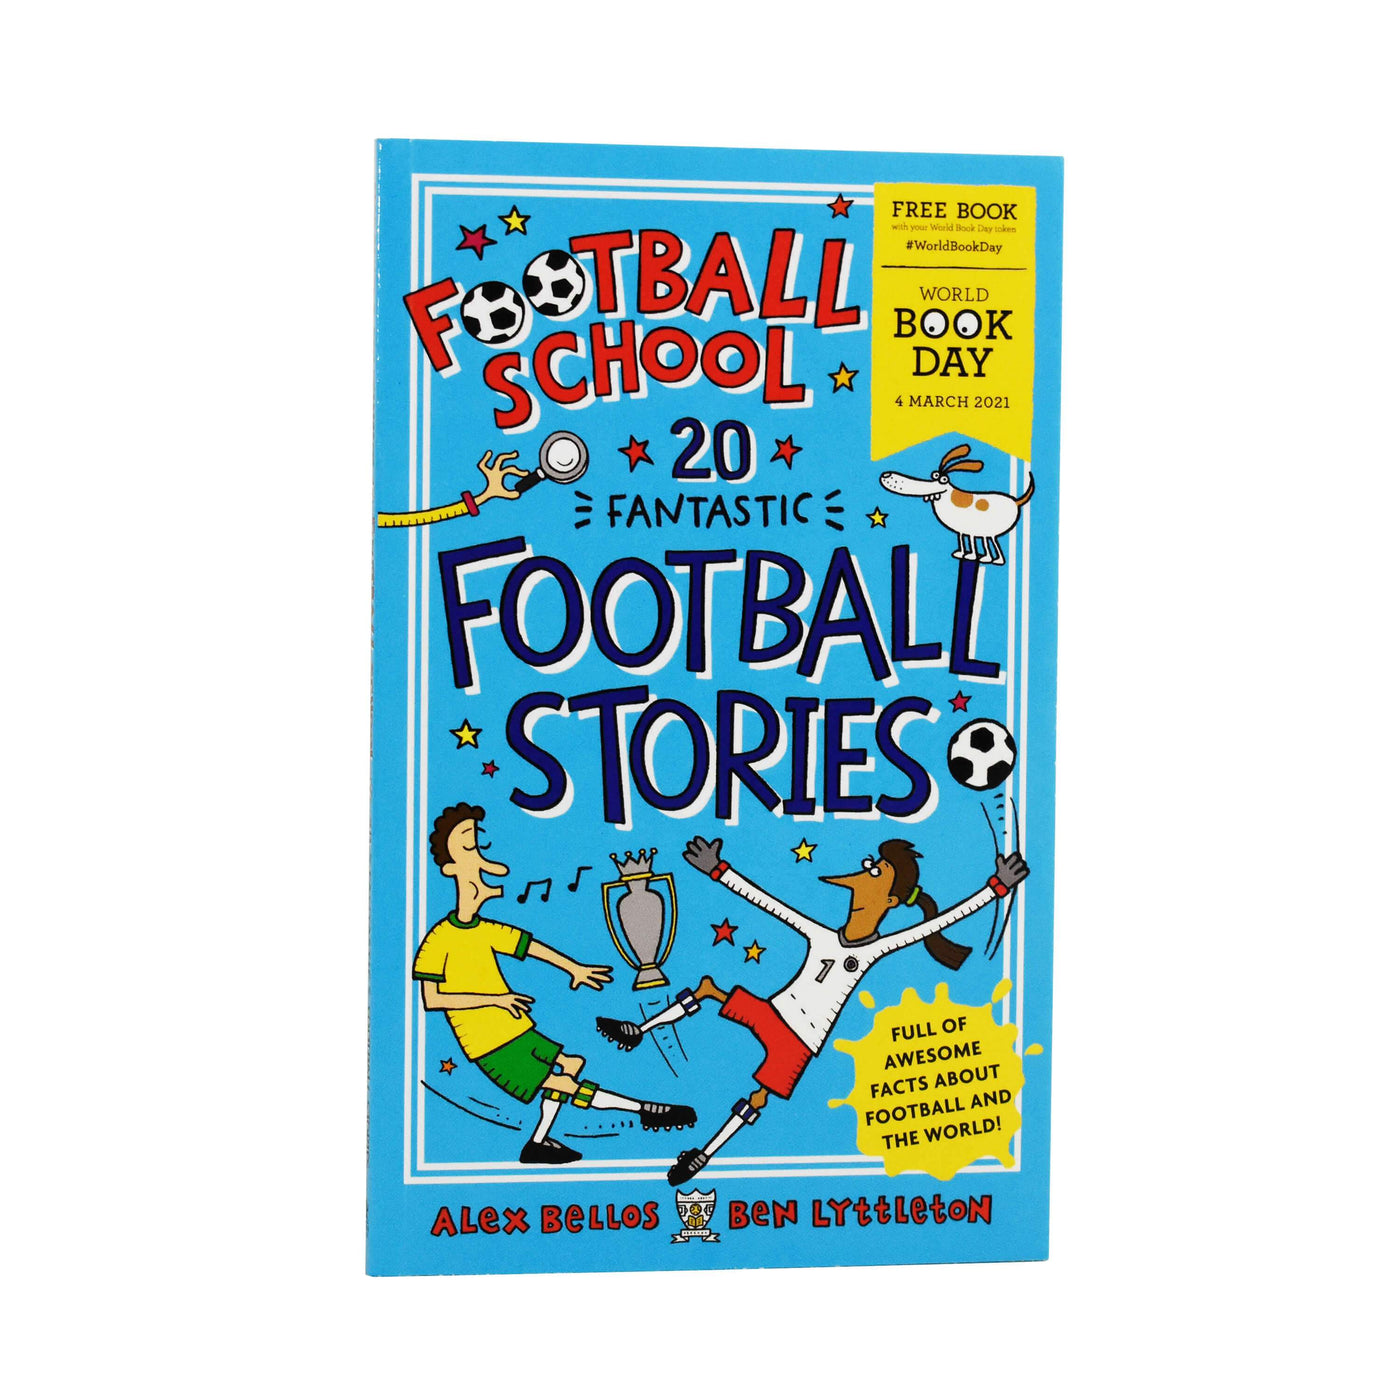 Football School 20 Fantastic Football Stories World Book Day 2021 by